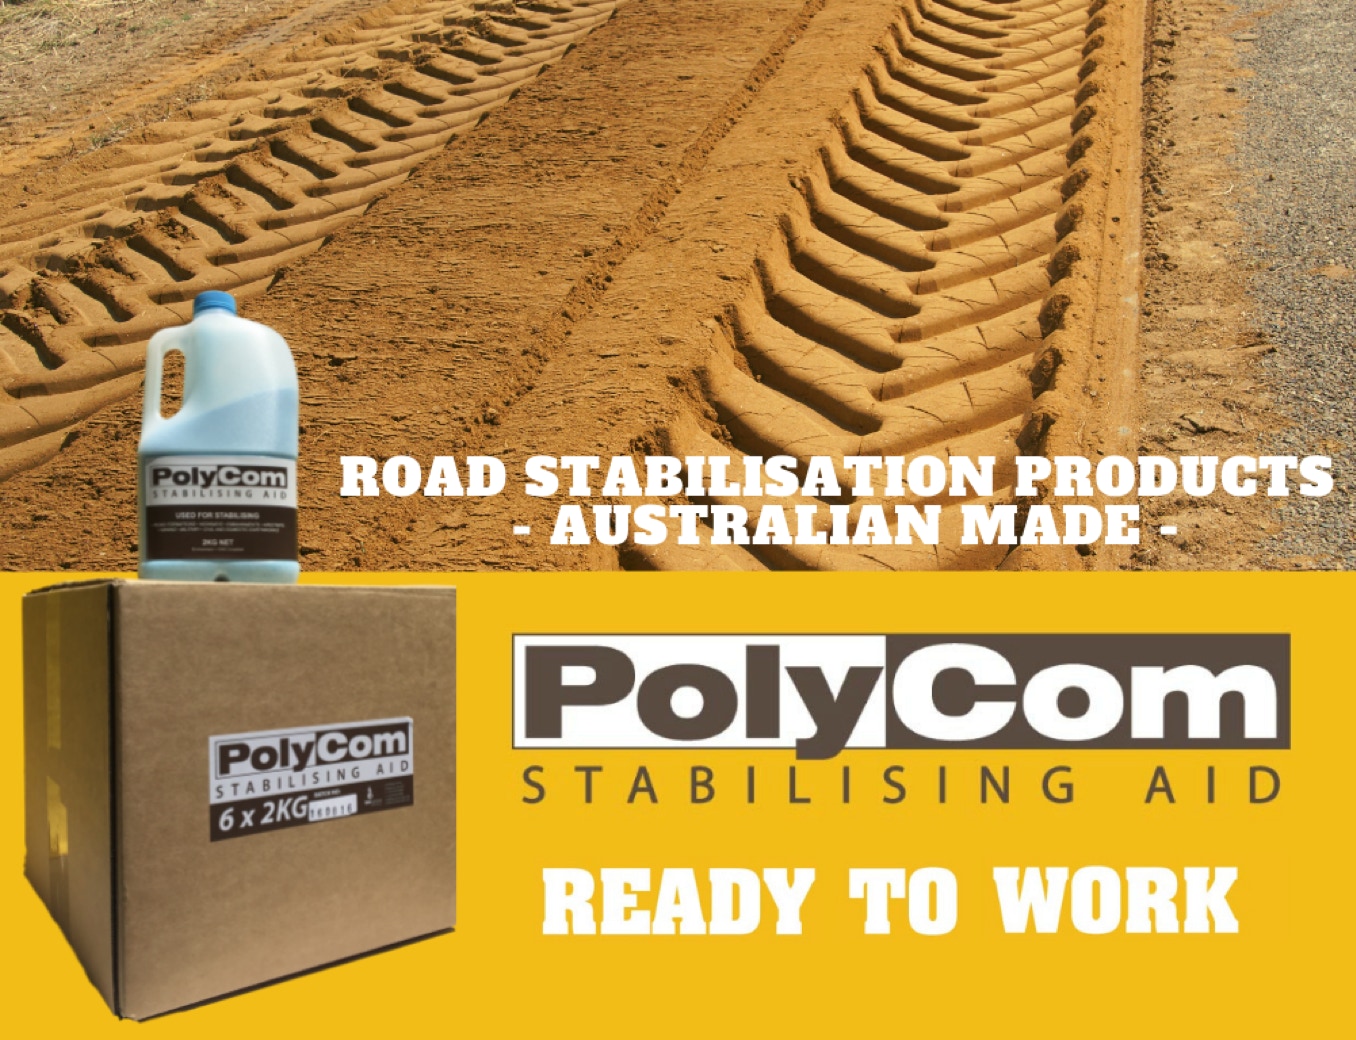 Roads made to last Longer and be stronger with Our PolyCom Additive